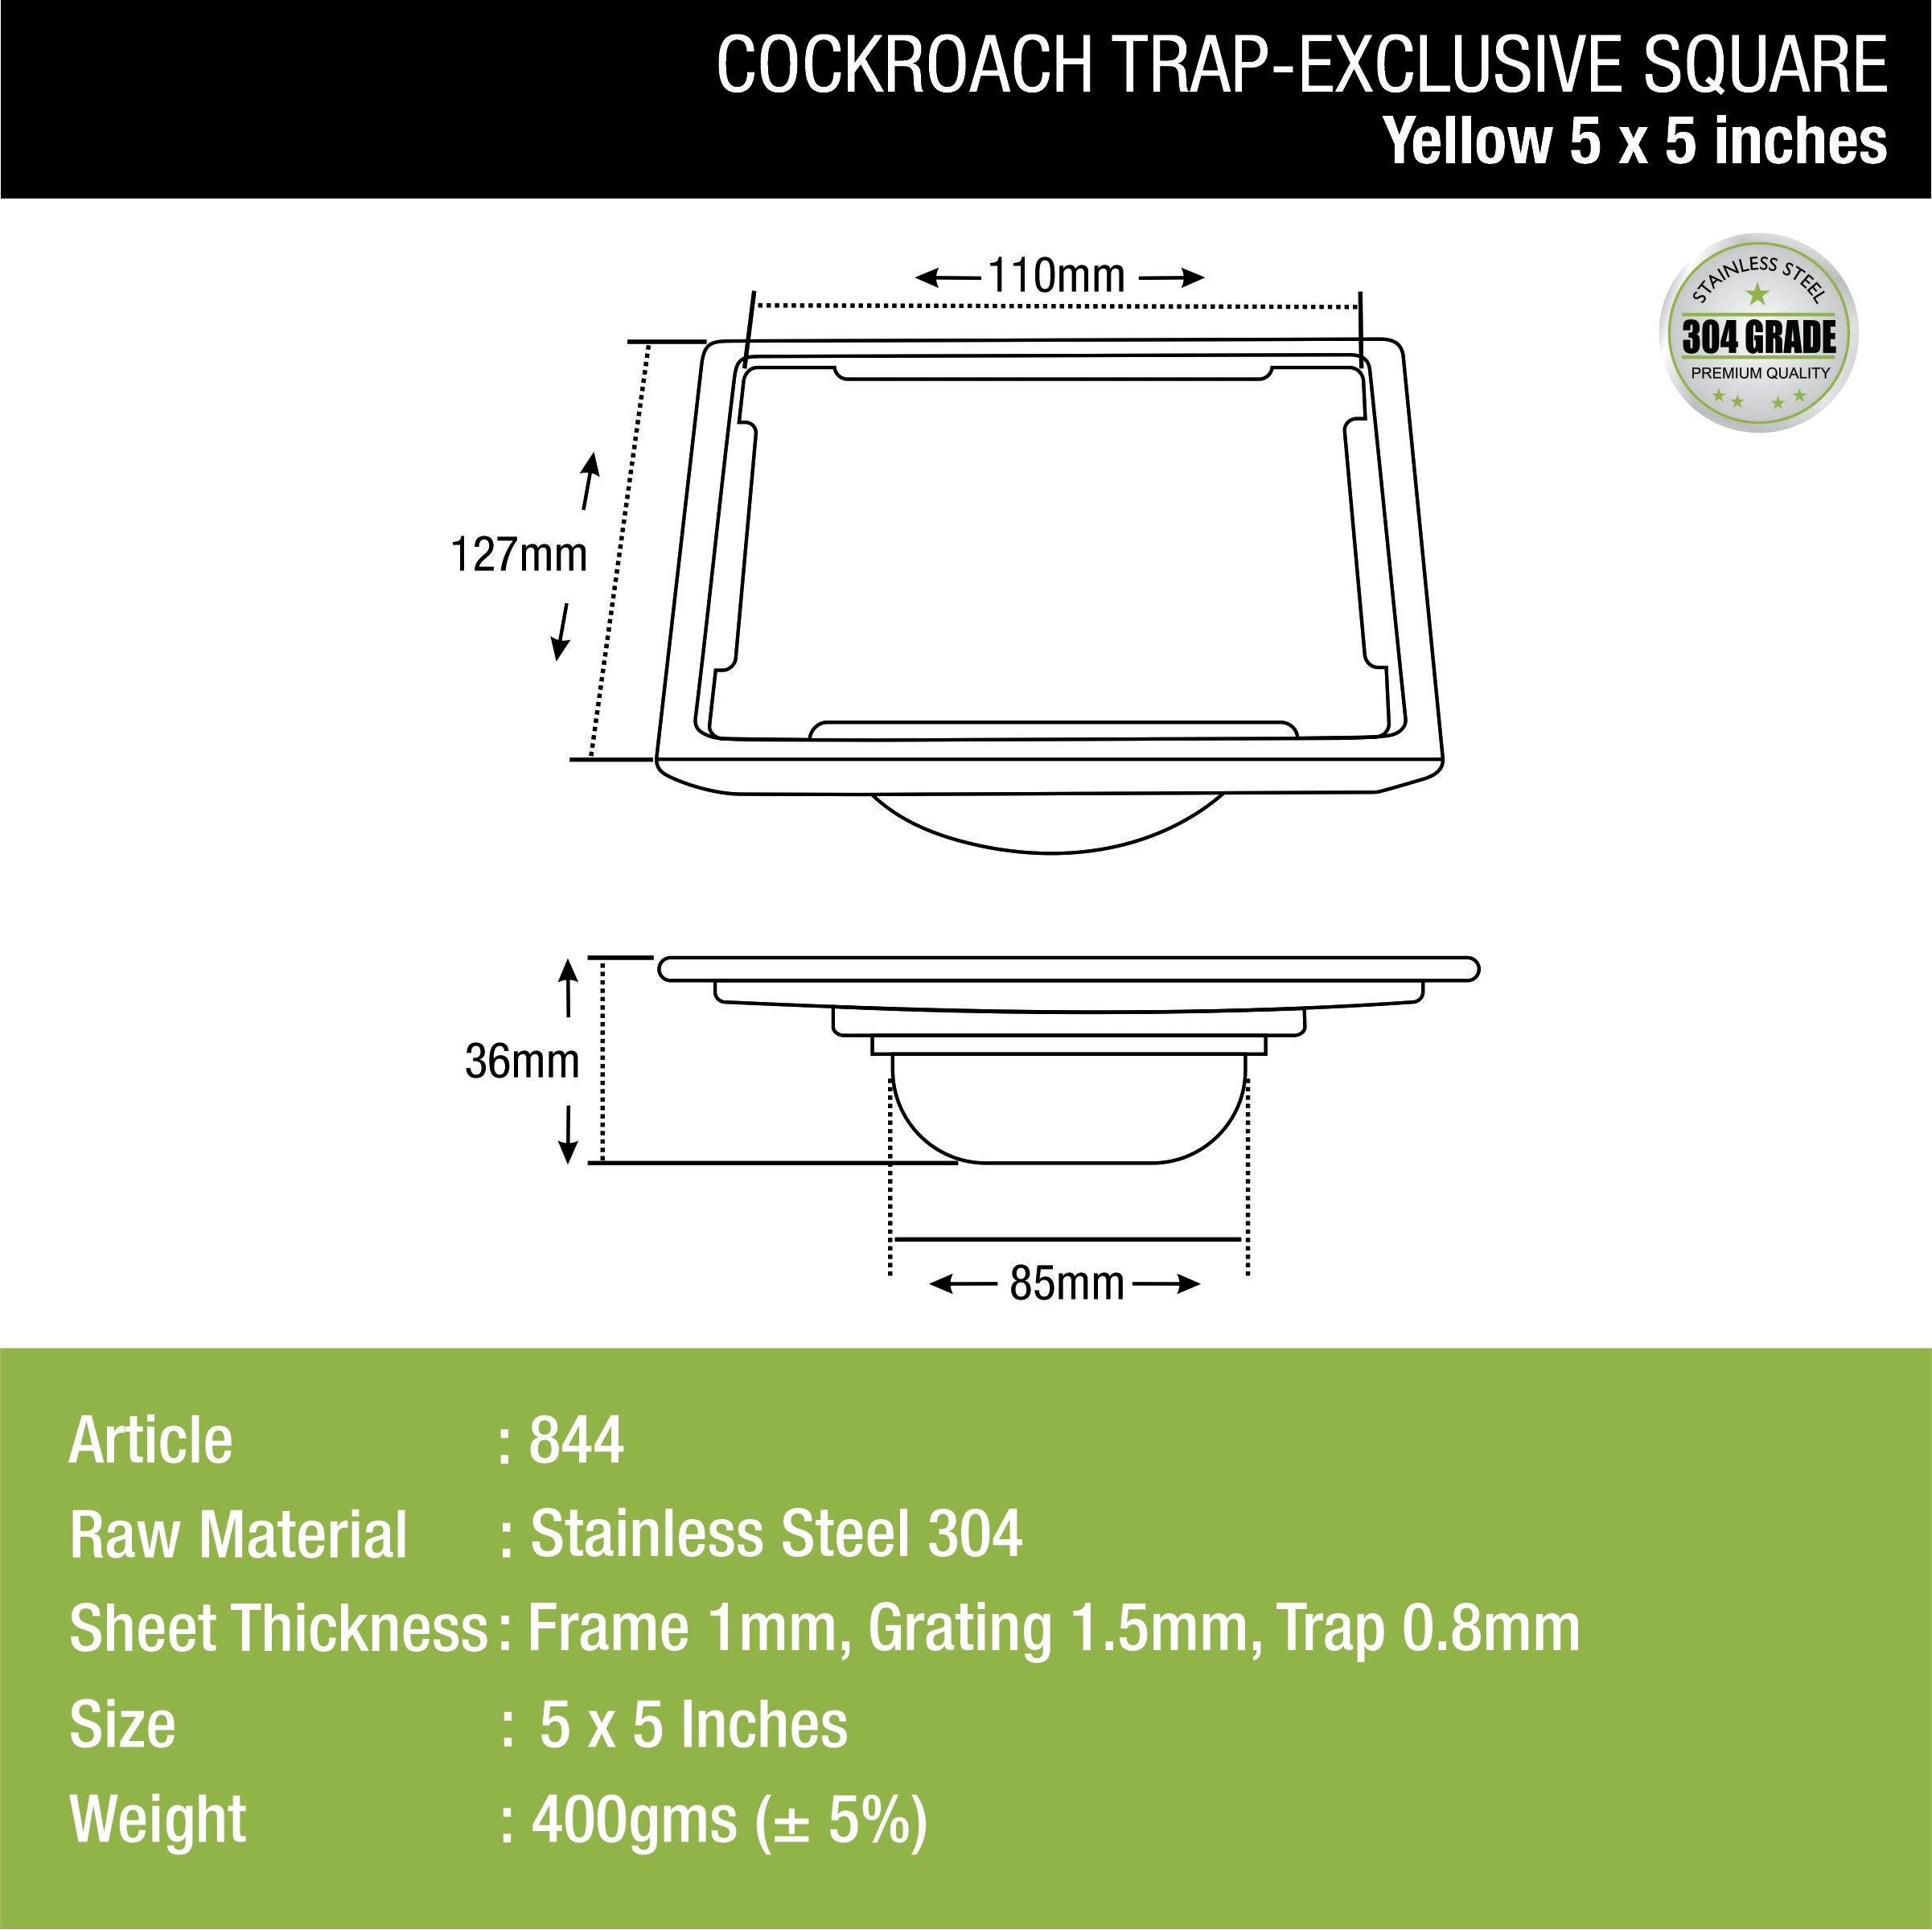 Yellow Exclusive Square Floor Drain (5 x 5 Inches) with Cockroach Trap dimensions and sizes